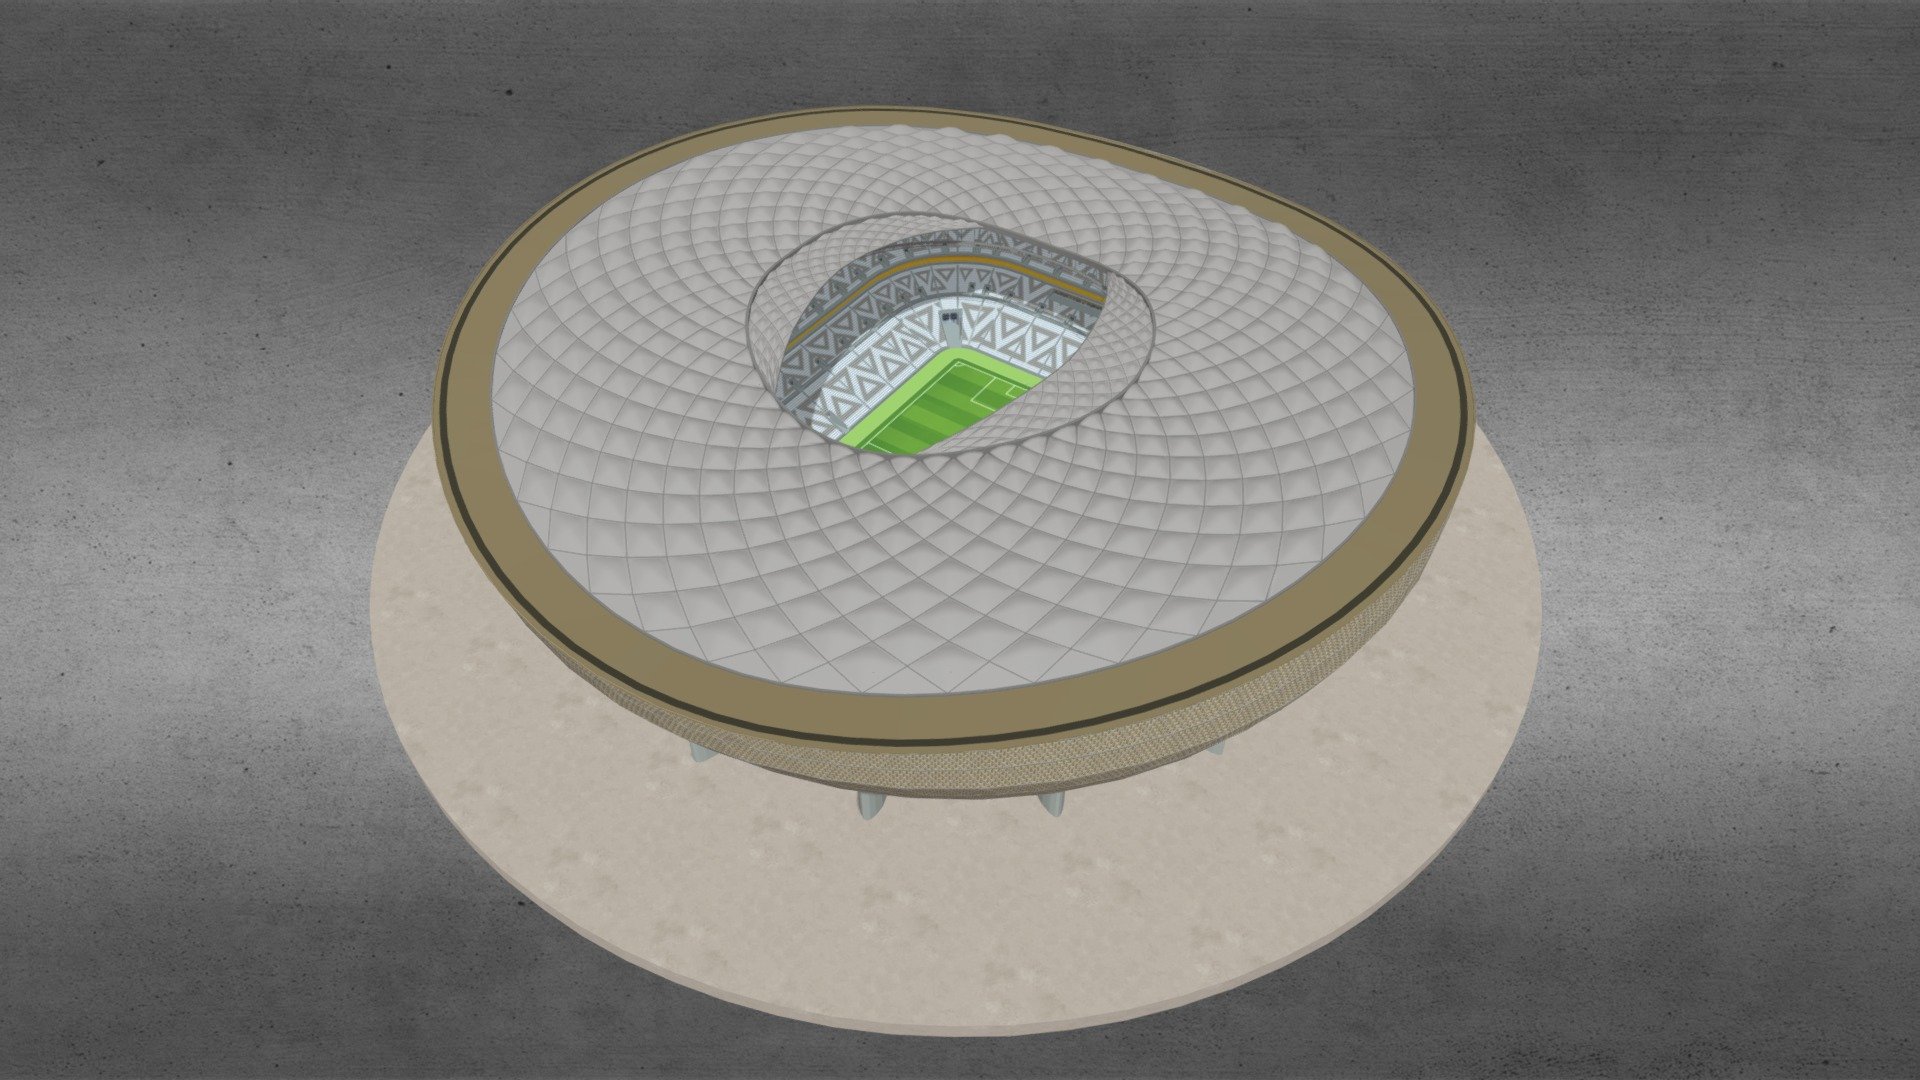 Lusail Iconic Stadium - Fifa World Cup 2022 Qatar 3D model
Lusail Iconic Stadium or Lusail Stadium is a football stadium in Lusail, Qatar. The stadium will host the final game of the 2022 FIFA World Cup. The Lusail Stadium, owned by the Qatar Football Association

Poly Count:
Verts 77252
Poly 99409
Features of Soccer Stadium - Lusail Iconic Stadium - FIFA World Cup 3D model - 3D model by nuralam018 3d model